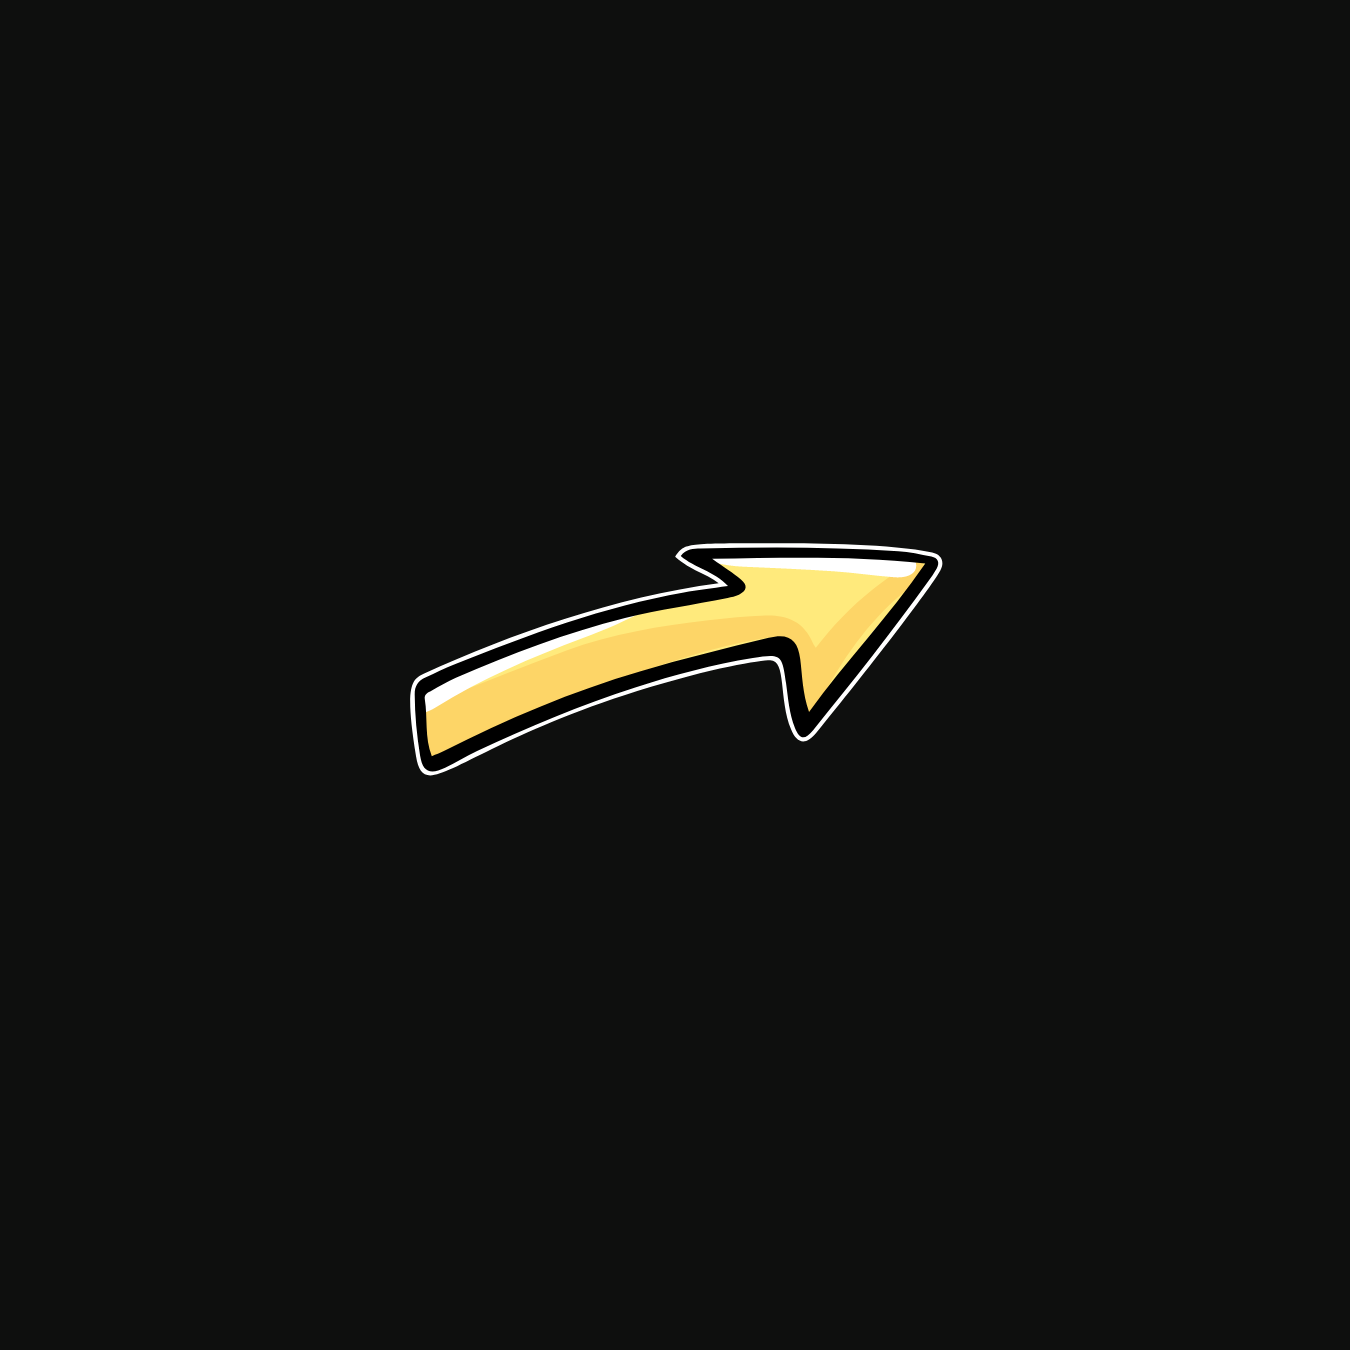  | Yellow Arrow PNG Set of 9 High Quality Images